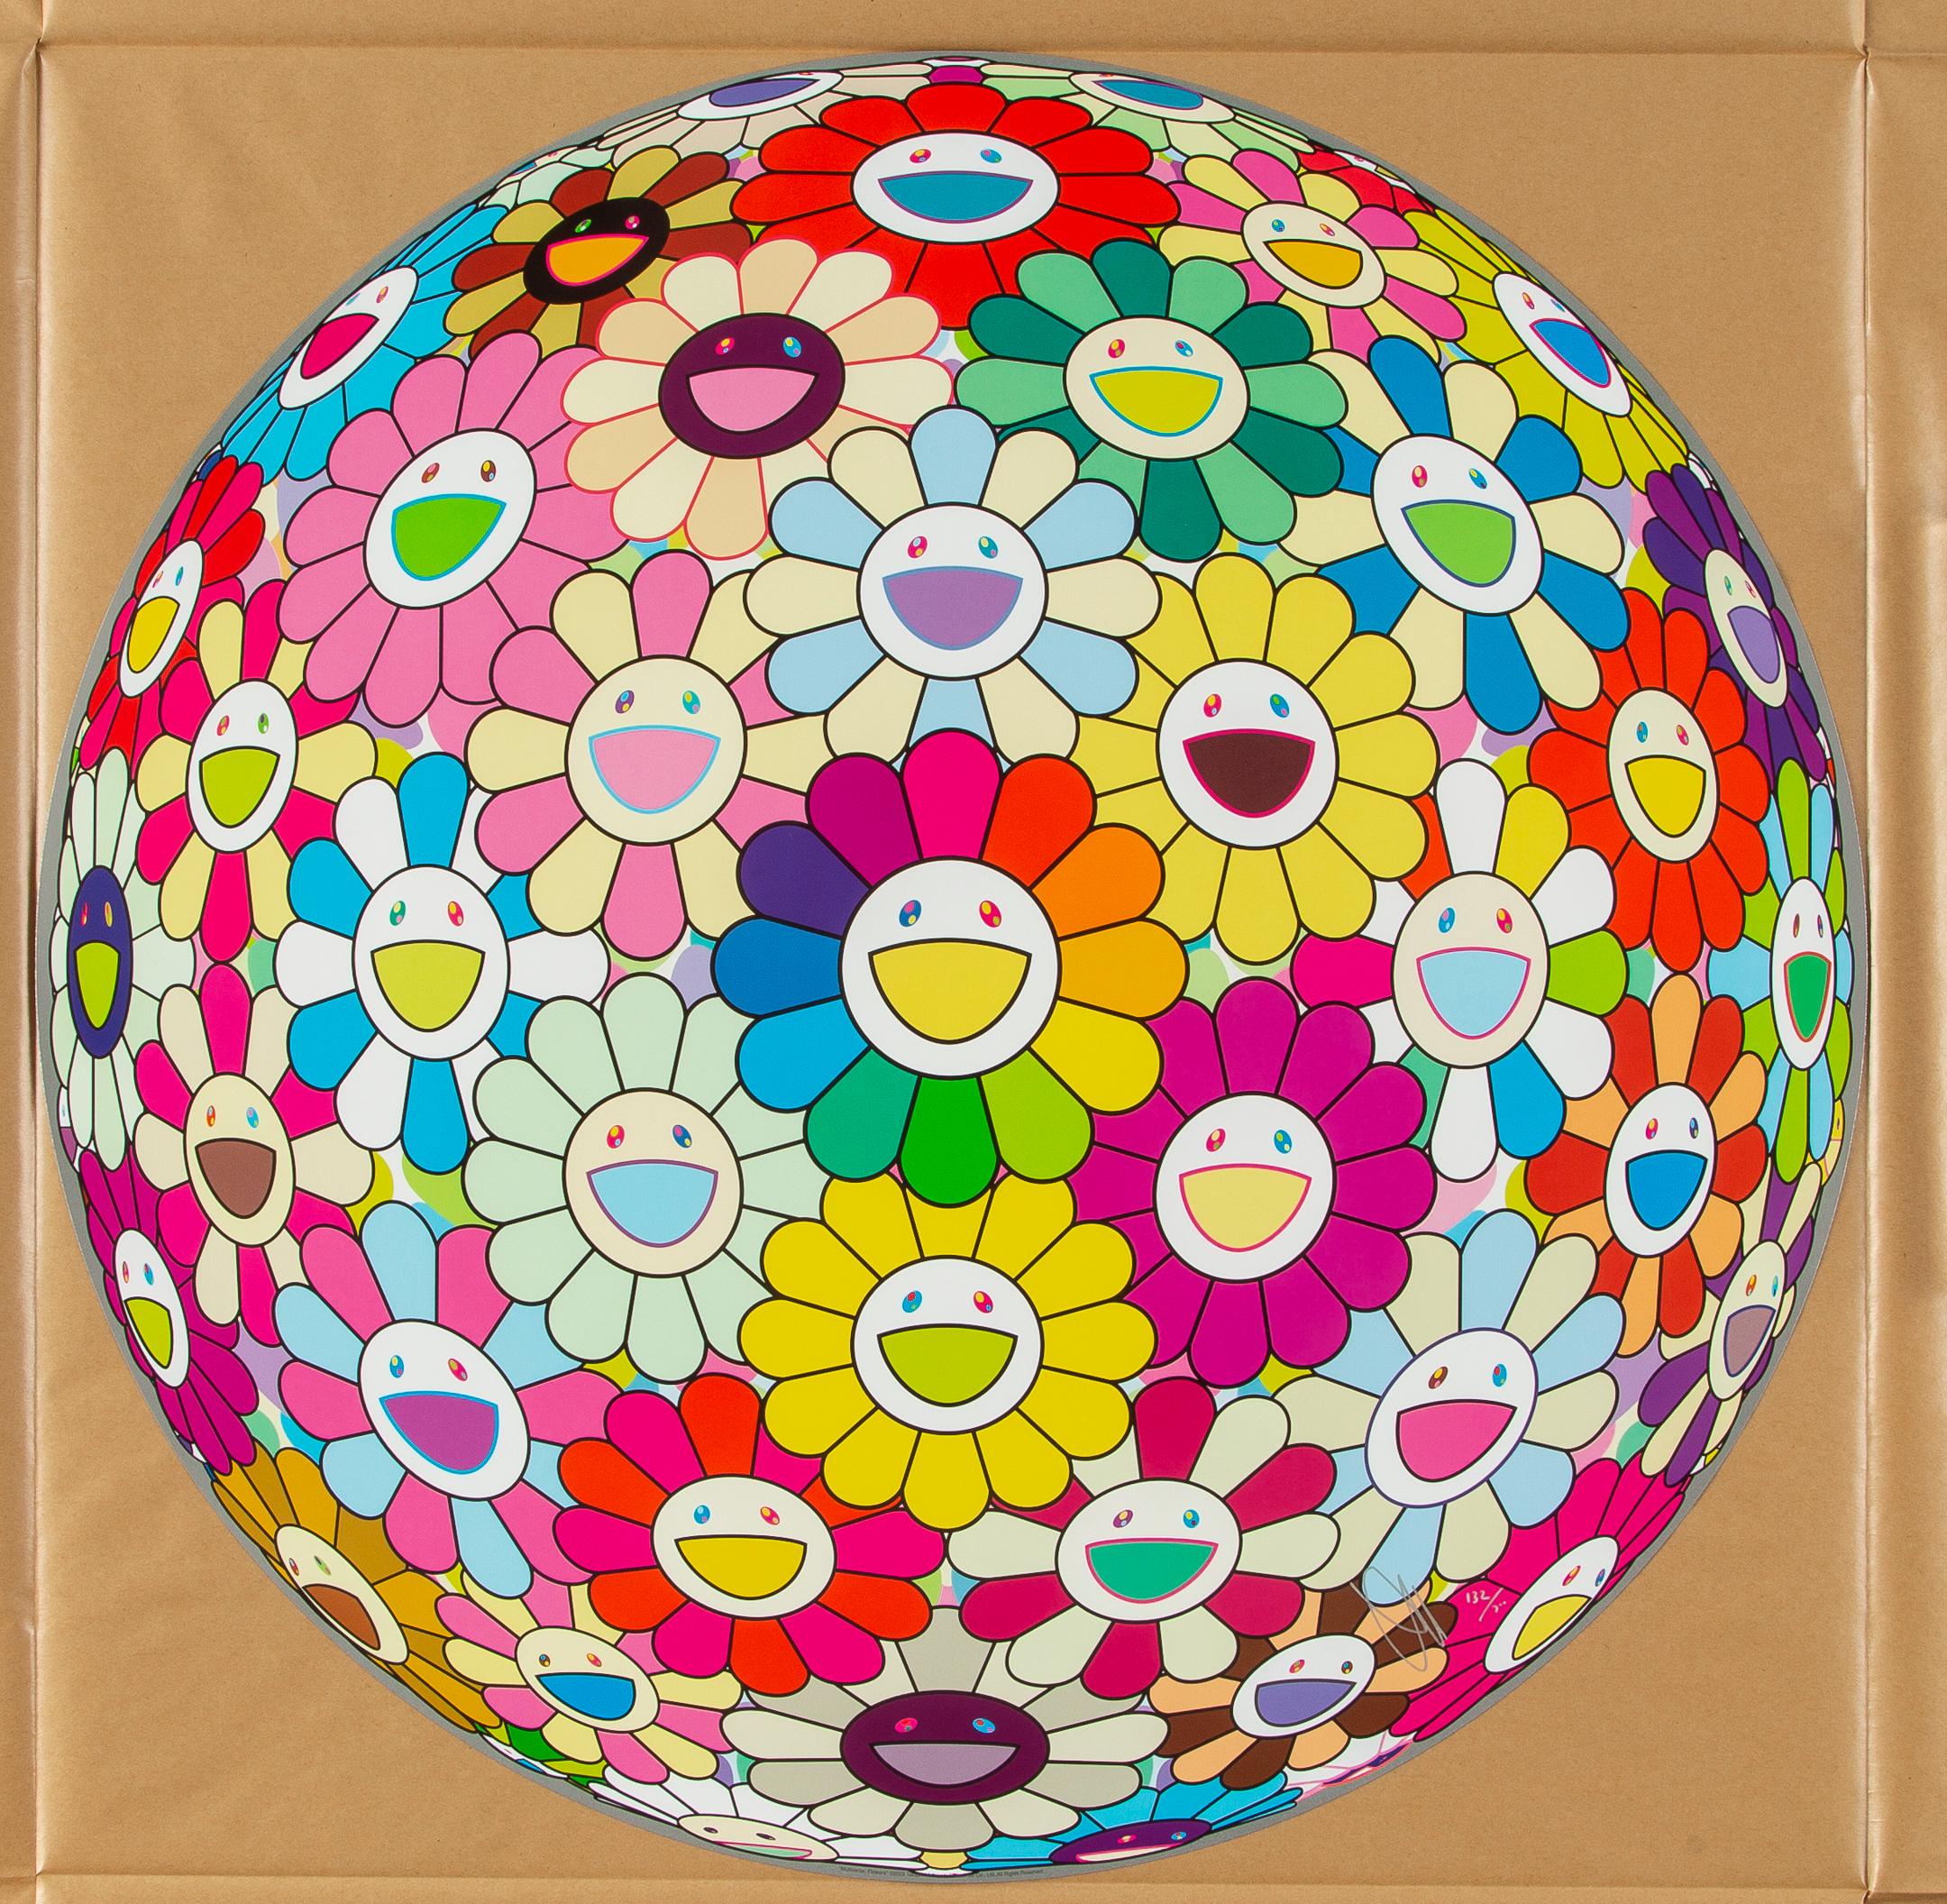 Multiverse, Flowers. Limited Edition (print) by Murakami signed and numbered. - Print by Takashi Murakami